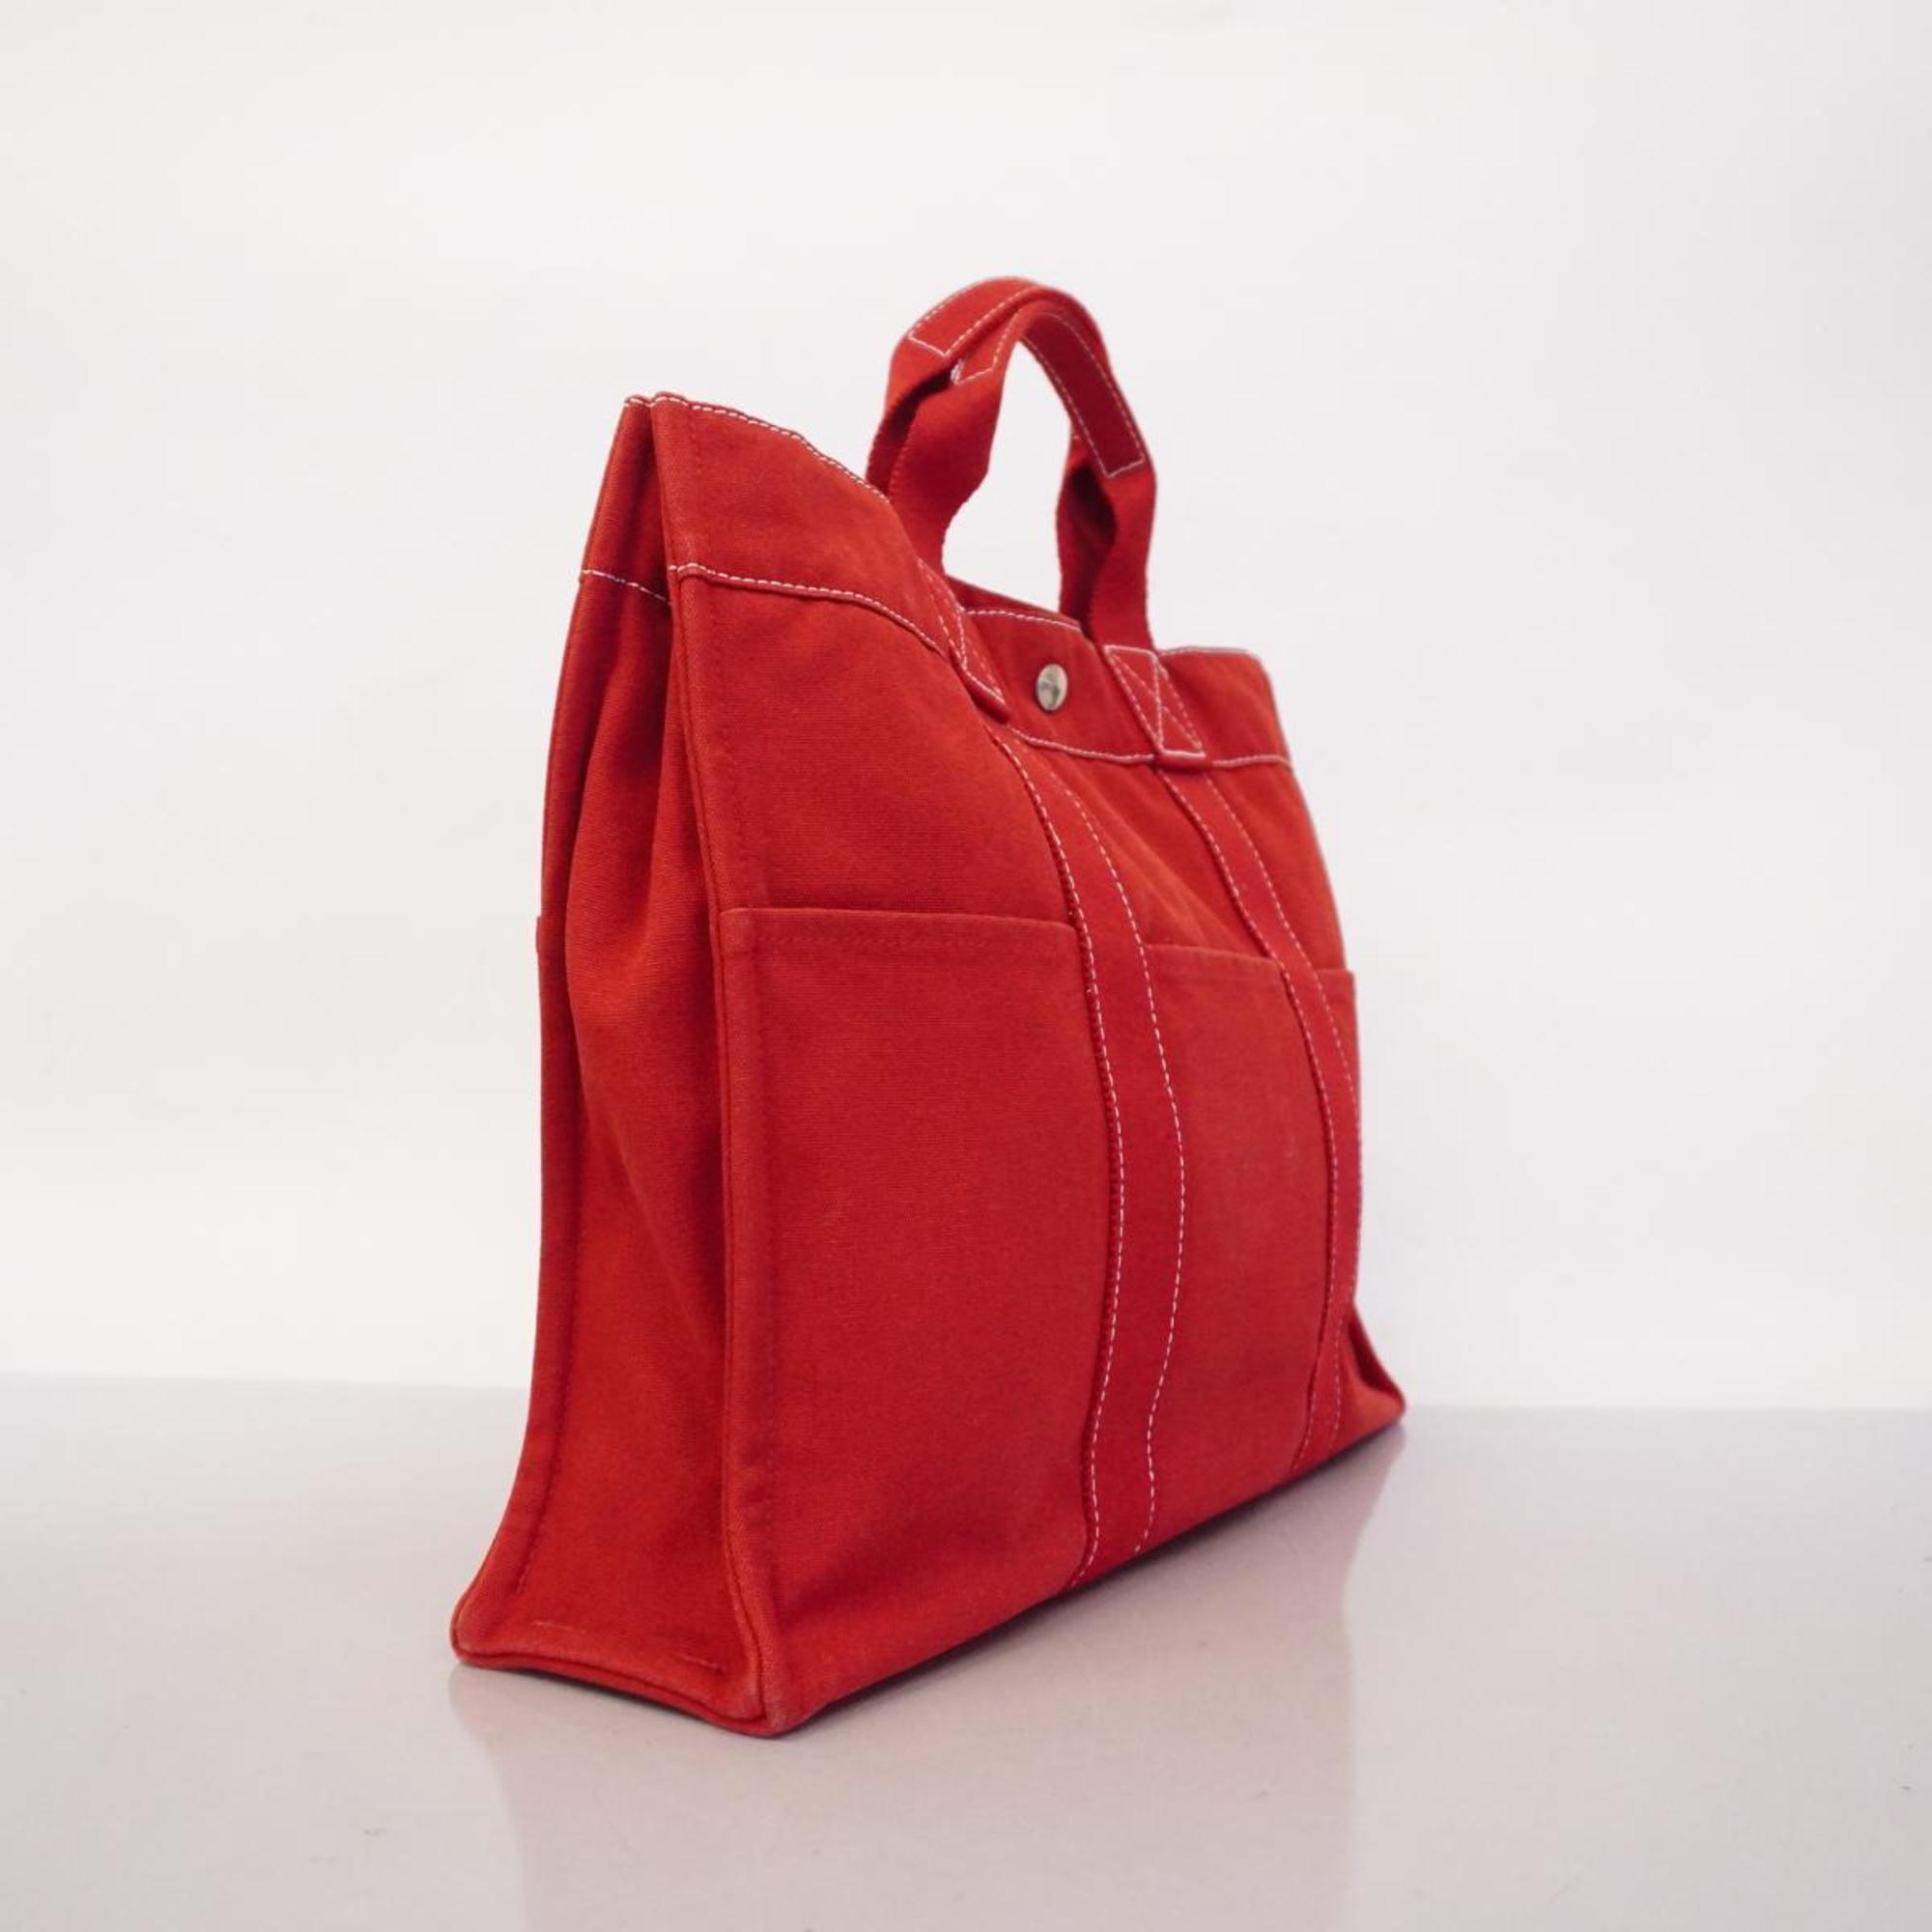 Hermes Tote Bag Deauville MM Canvas Red Women's